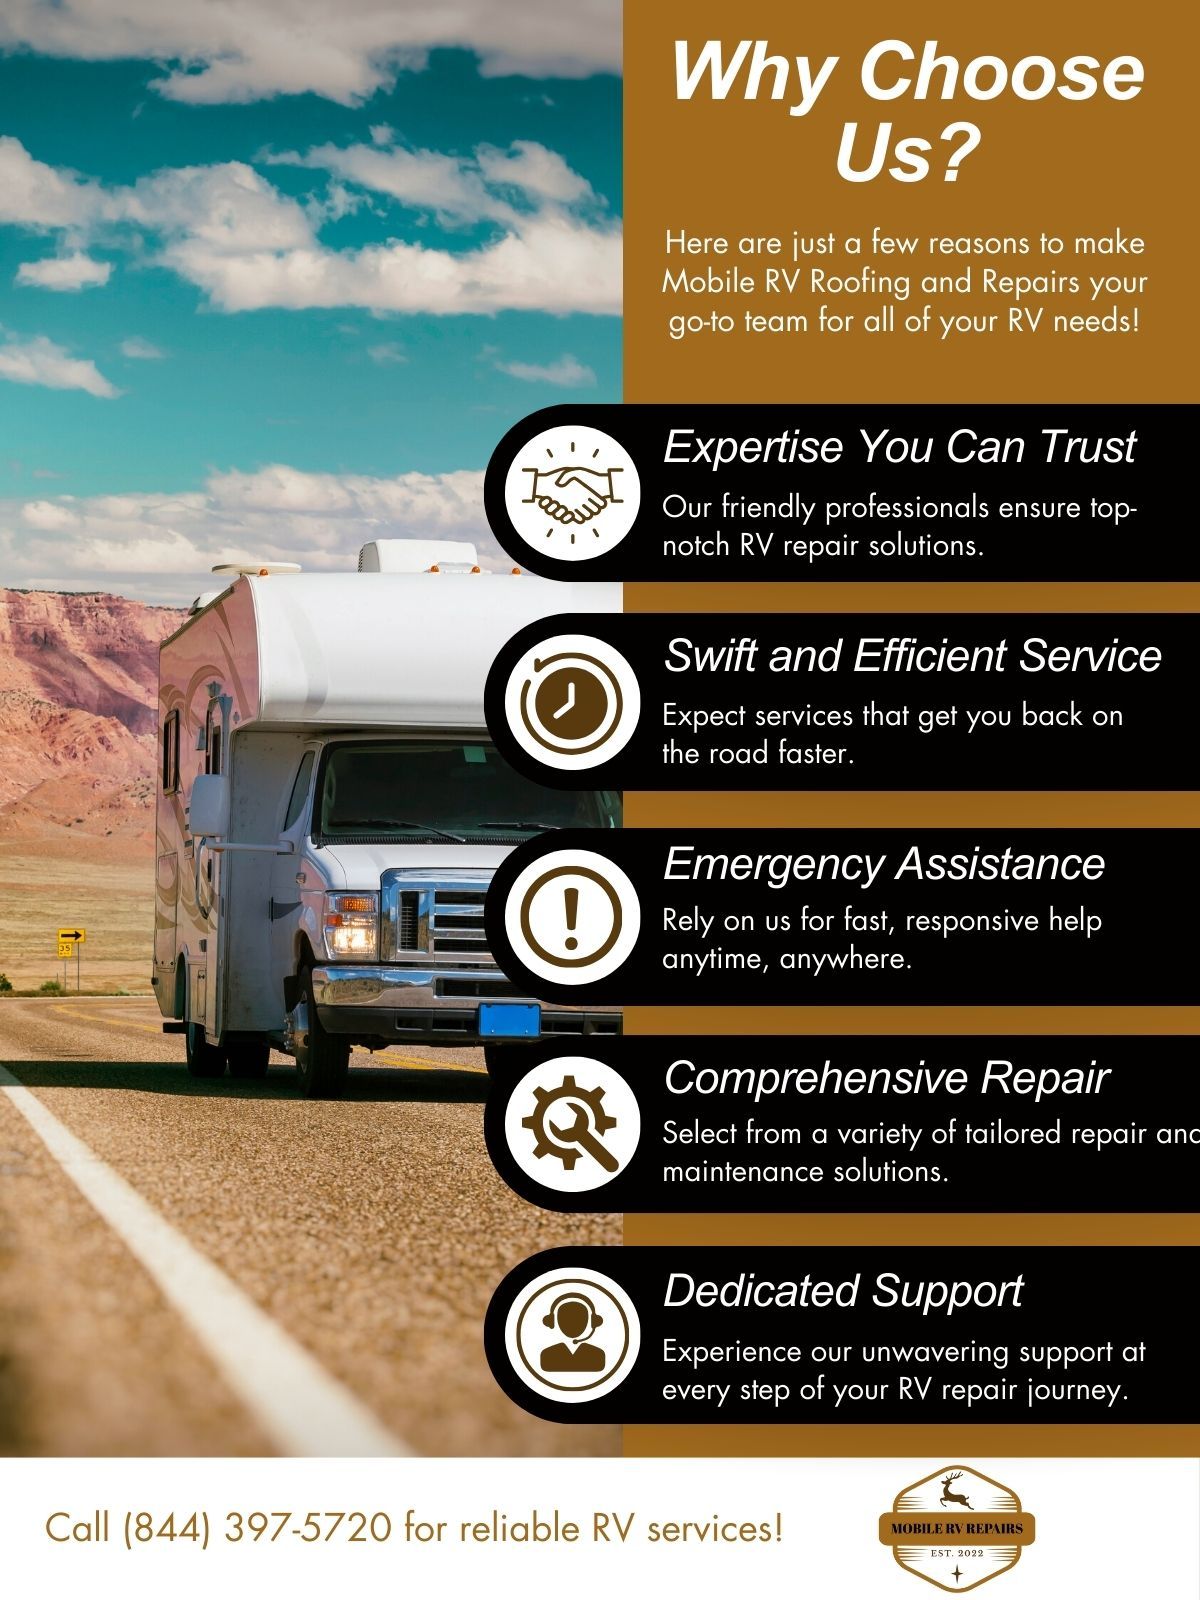 M42658 - Infographic - Why Choose Us.jpg